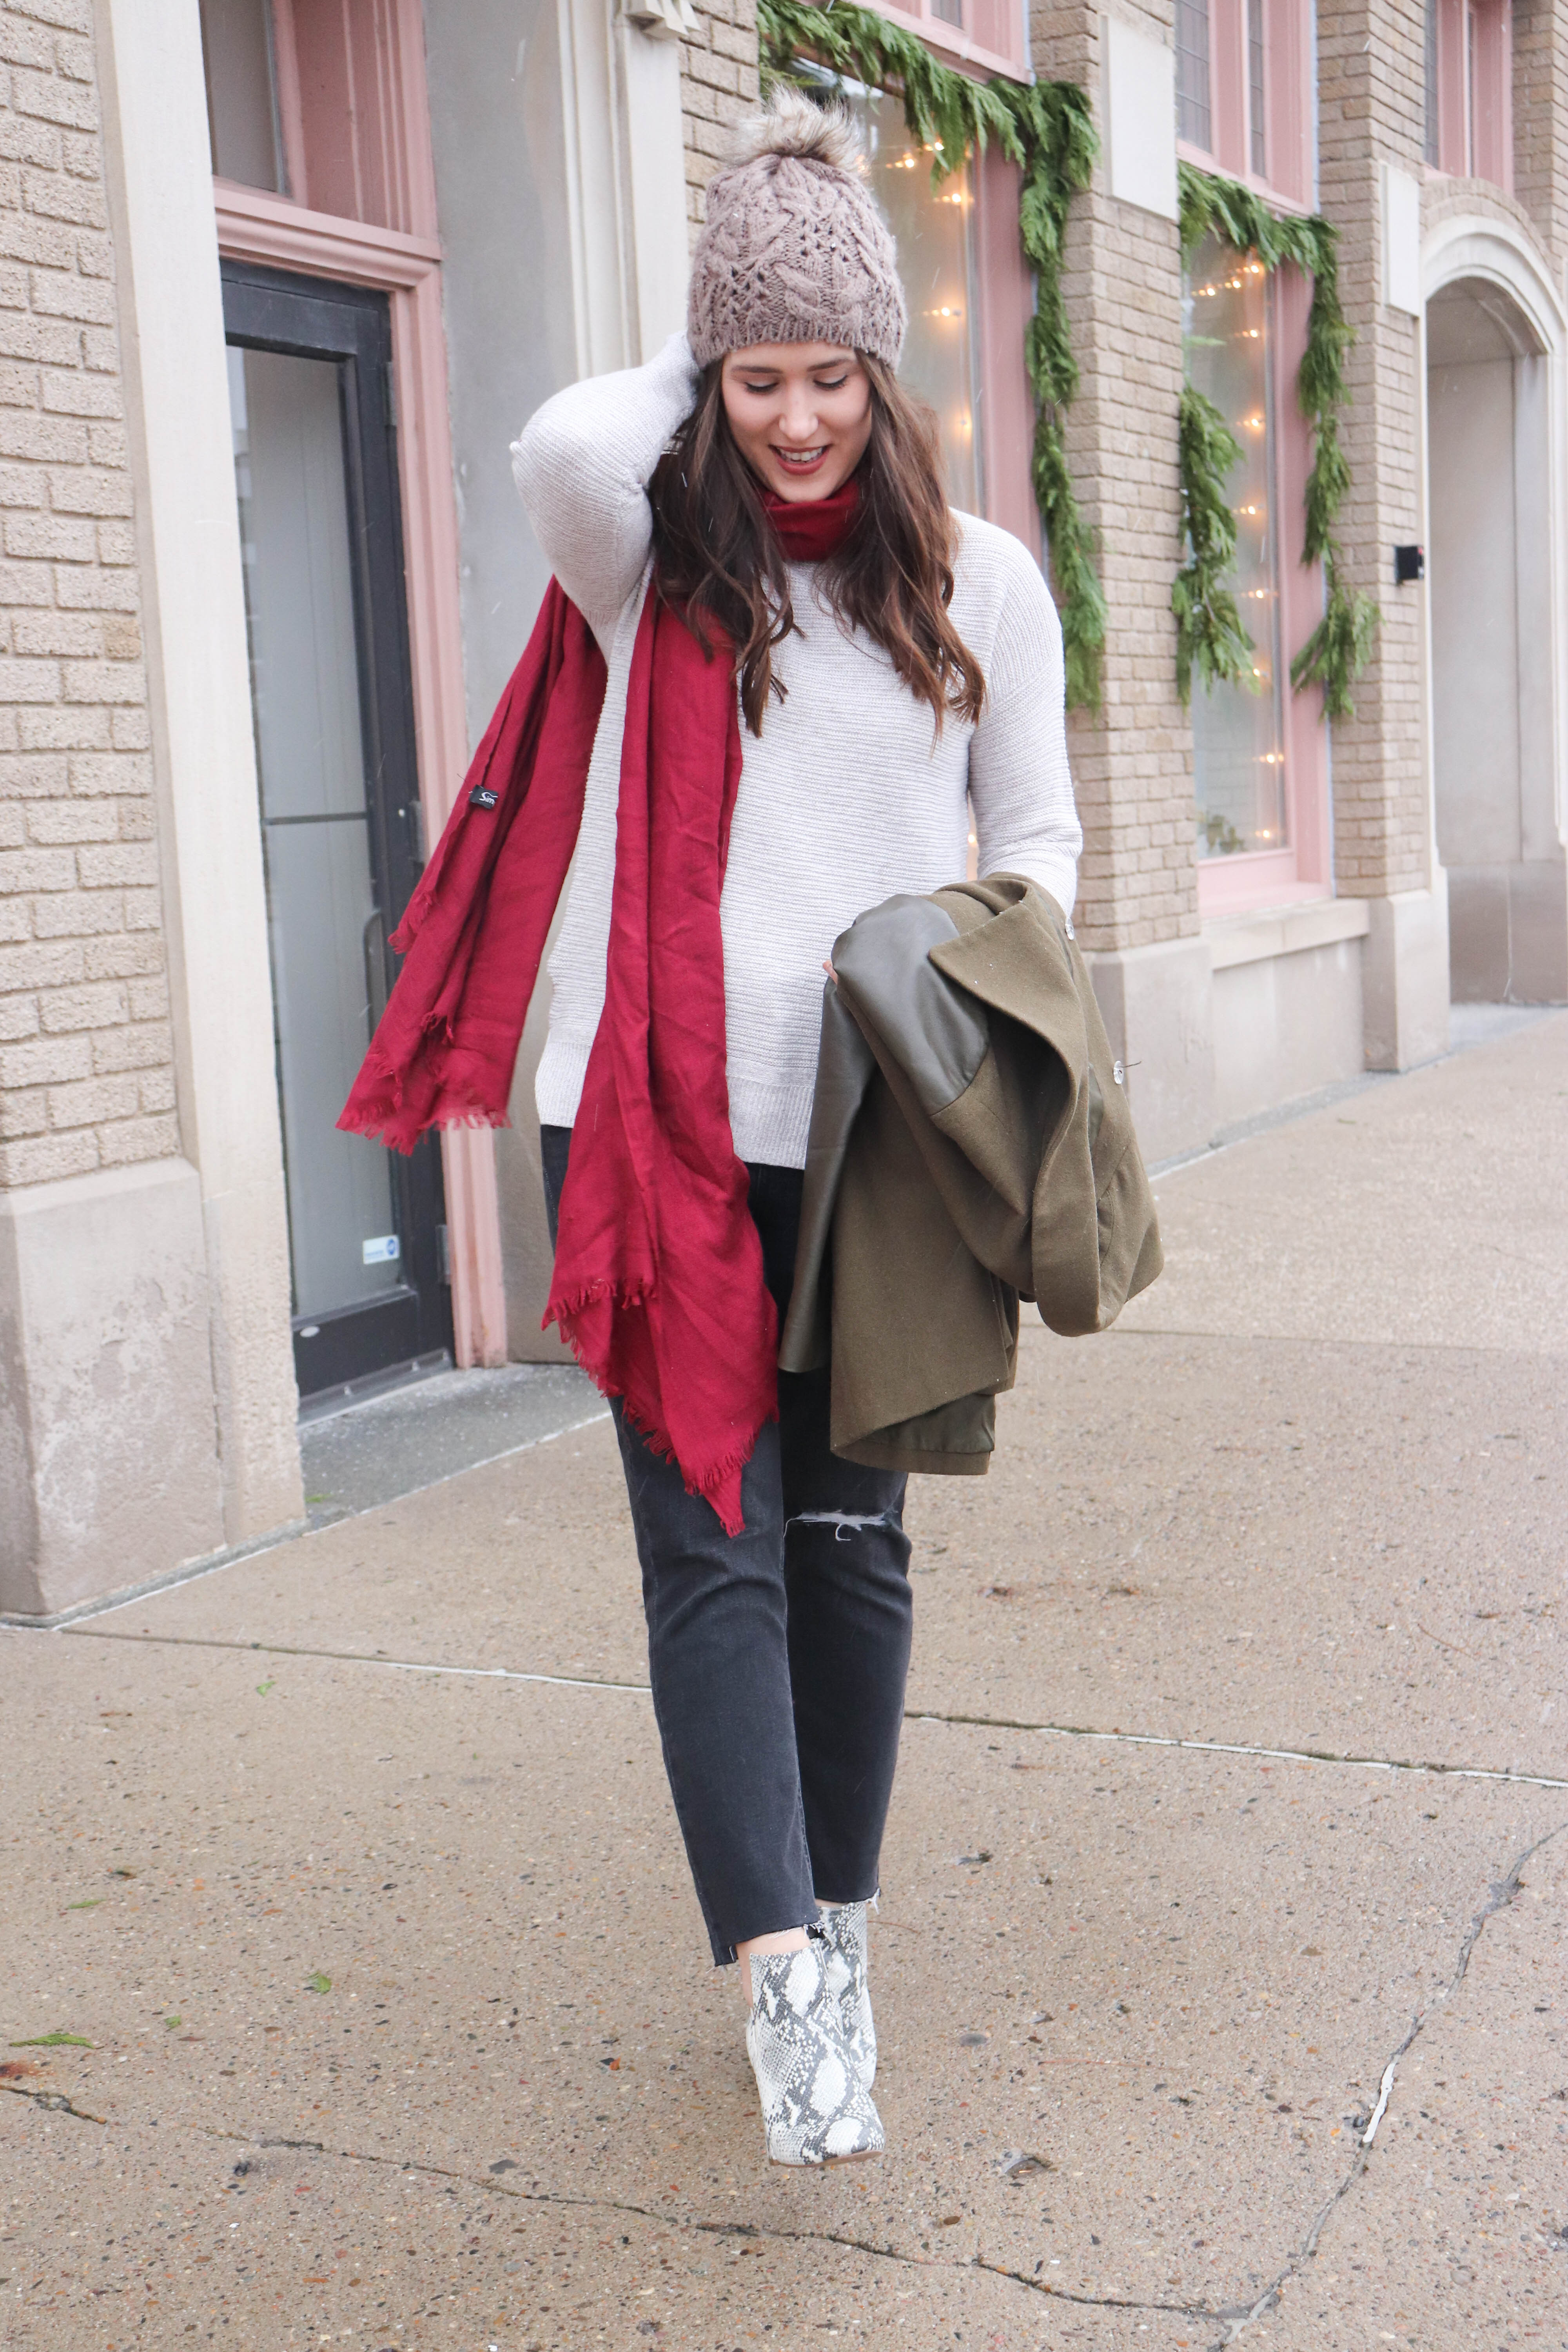 How I Avoid The Holiday Rush - Old Navy Sweater